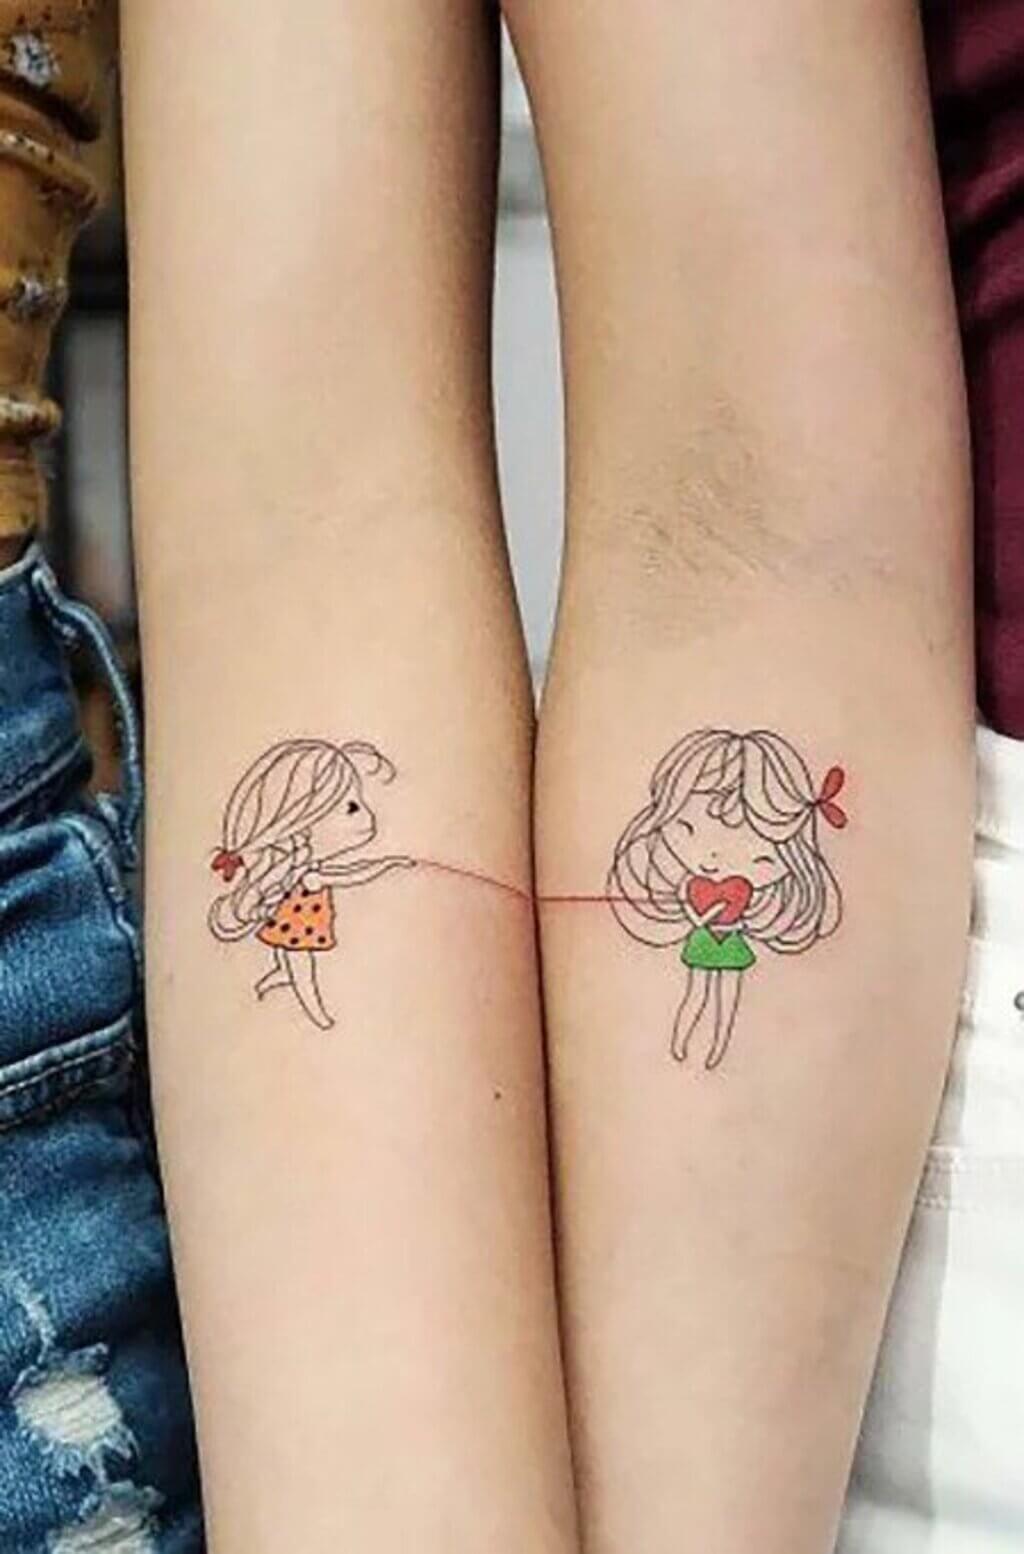 7 Subtle Flower Tattoos Youll Want To Get With Your Bestie